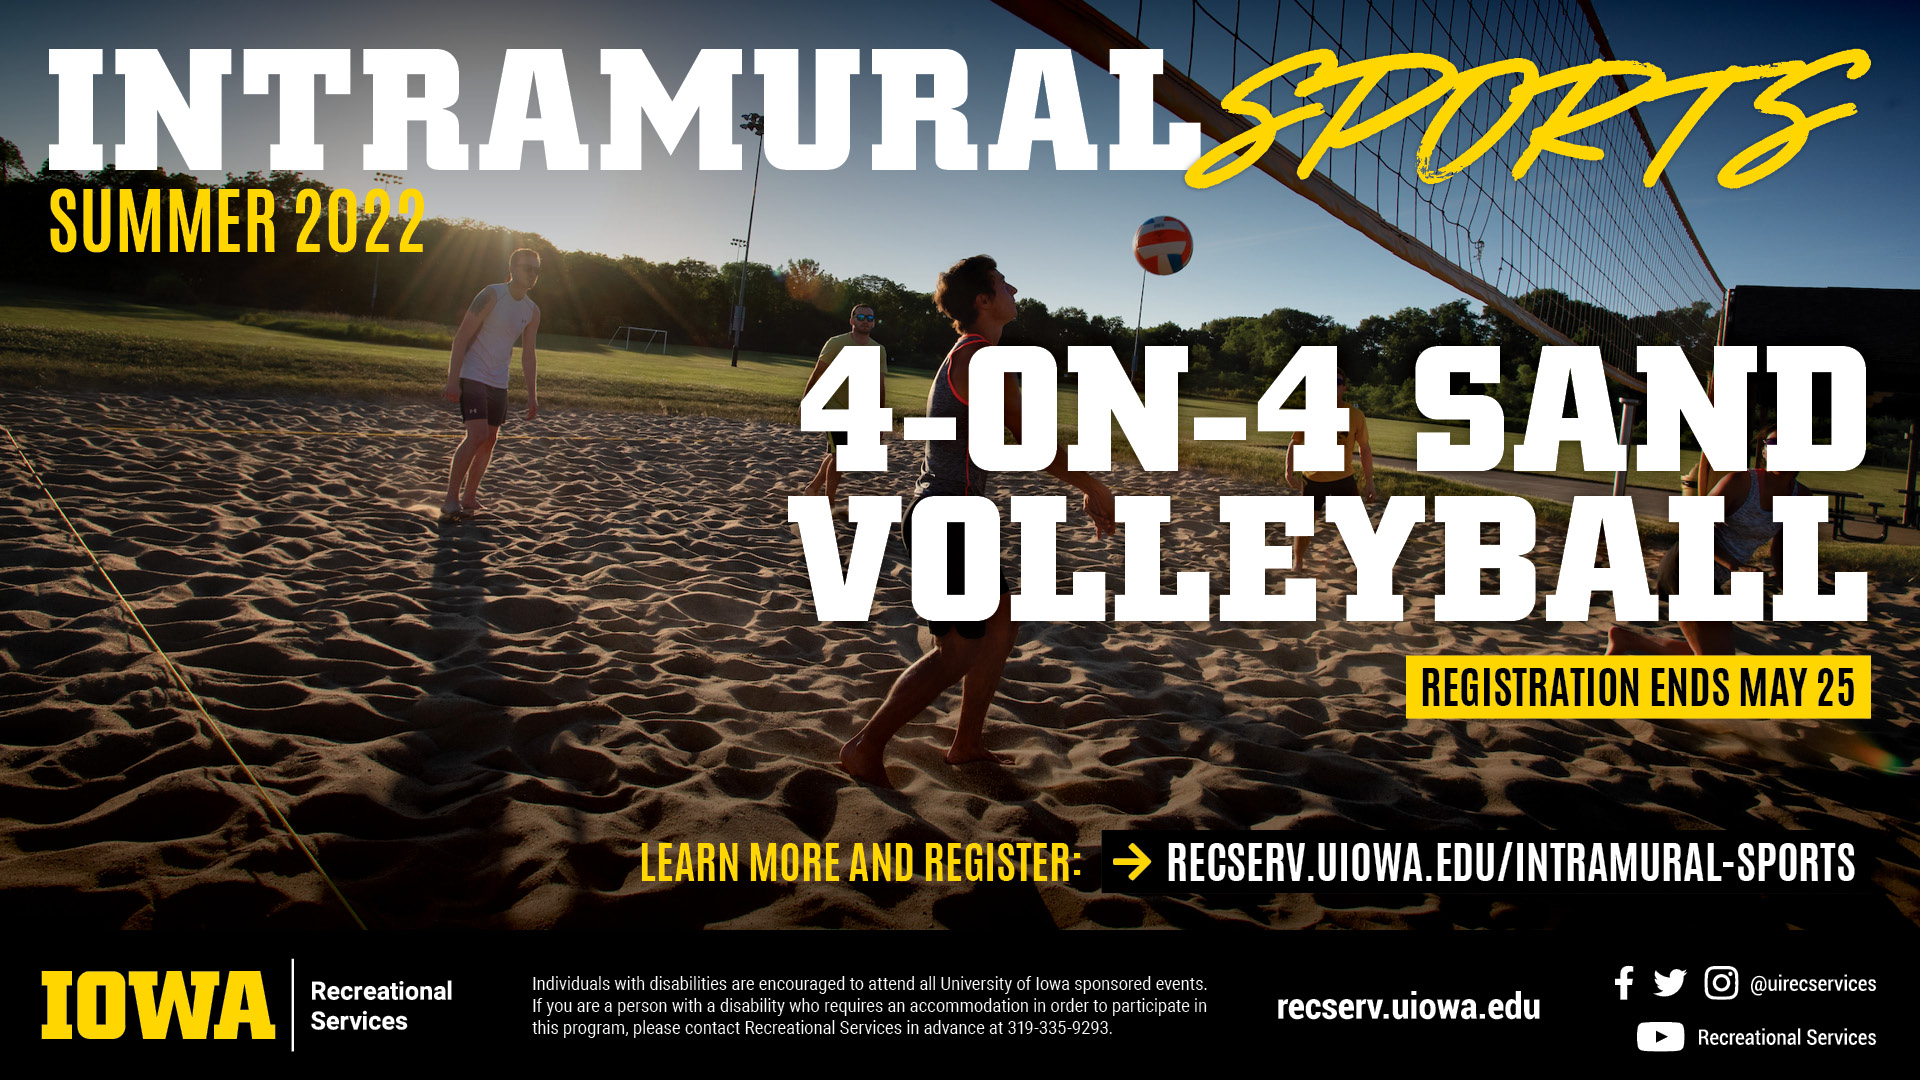 Summer 2022 Intramural Sports 4 on 4 Sand Volleyball. Registration ends May 25th. Learn more and register: recserv.uiowa.edu/intramural-sports